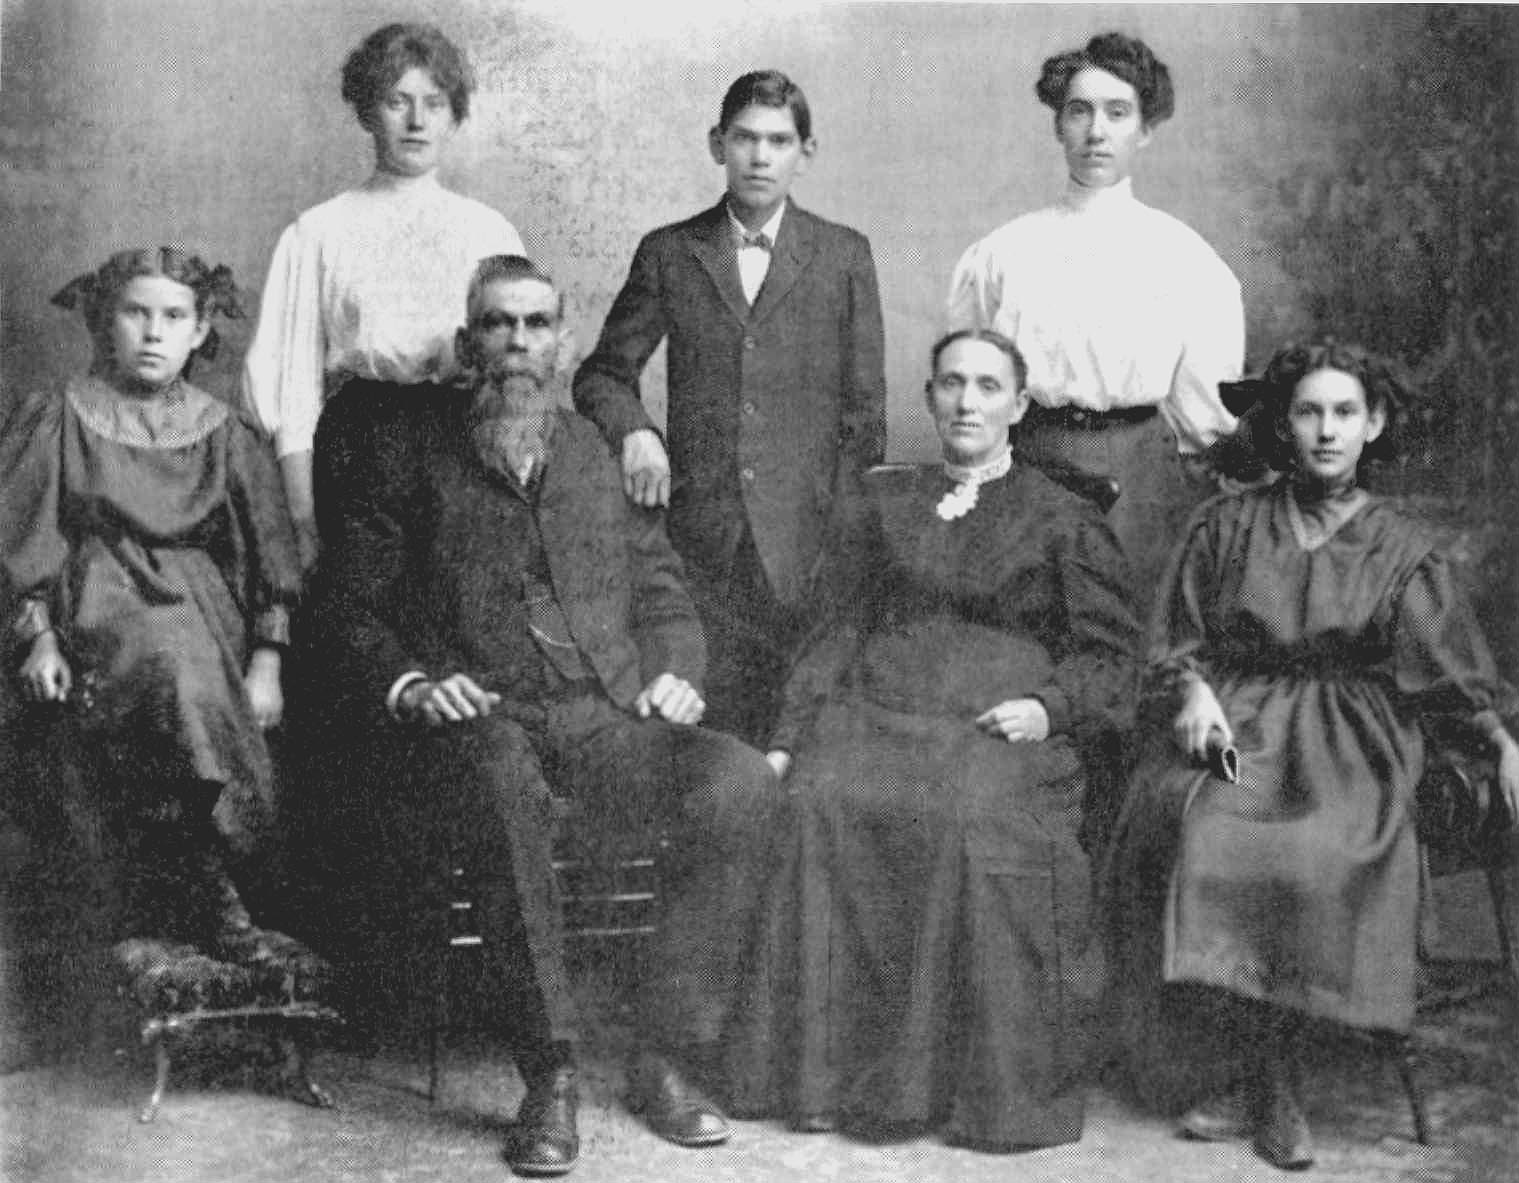 Benjamin Chamberlin Critchlow and Elizabeth Frances Fellows Critchlow family c. 1907